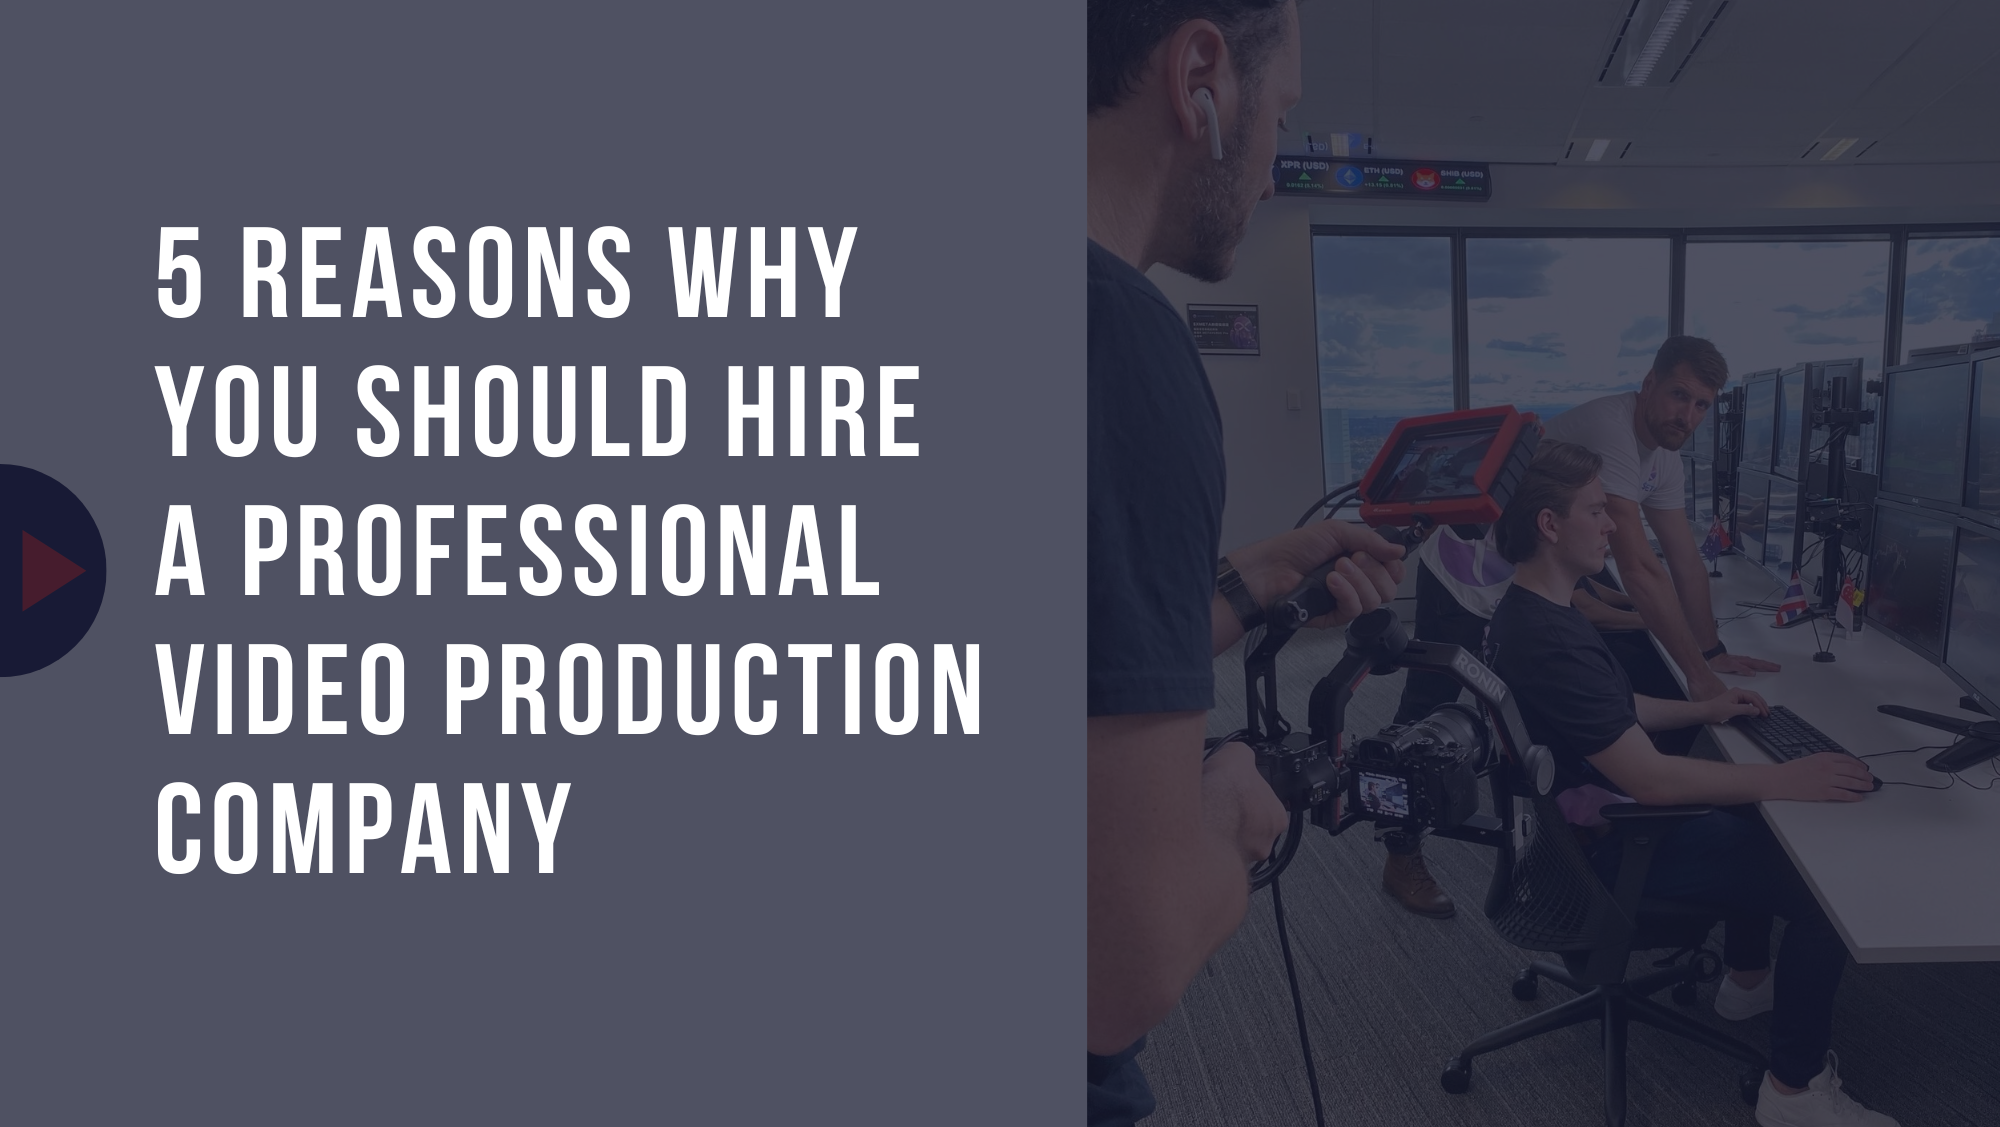 You are currently viewing 5 Reasons Why You Should Hire a Professional Video Production Company in Sydney